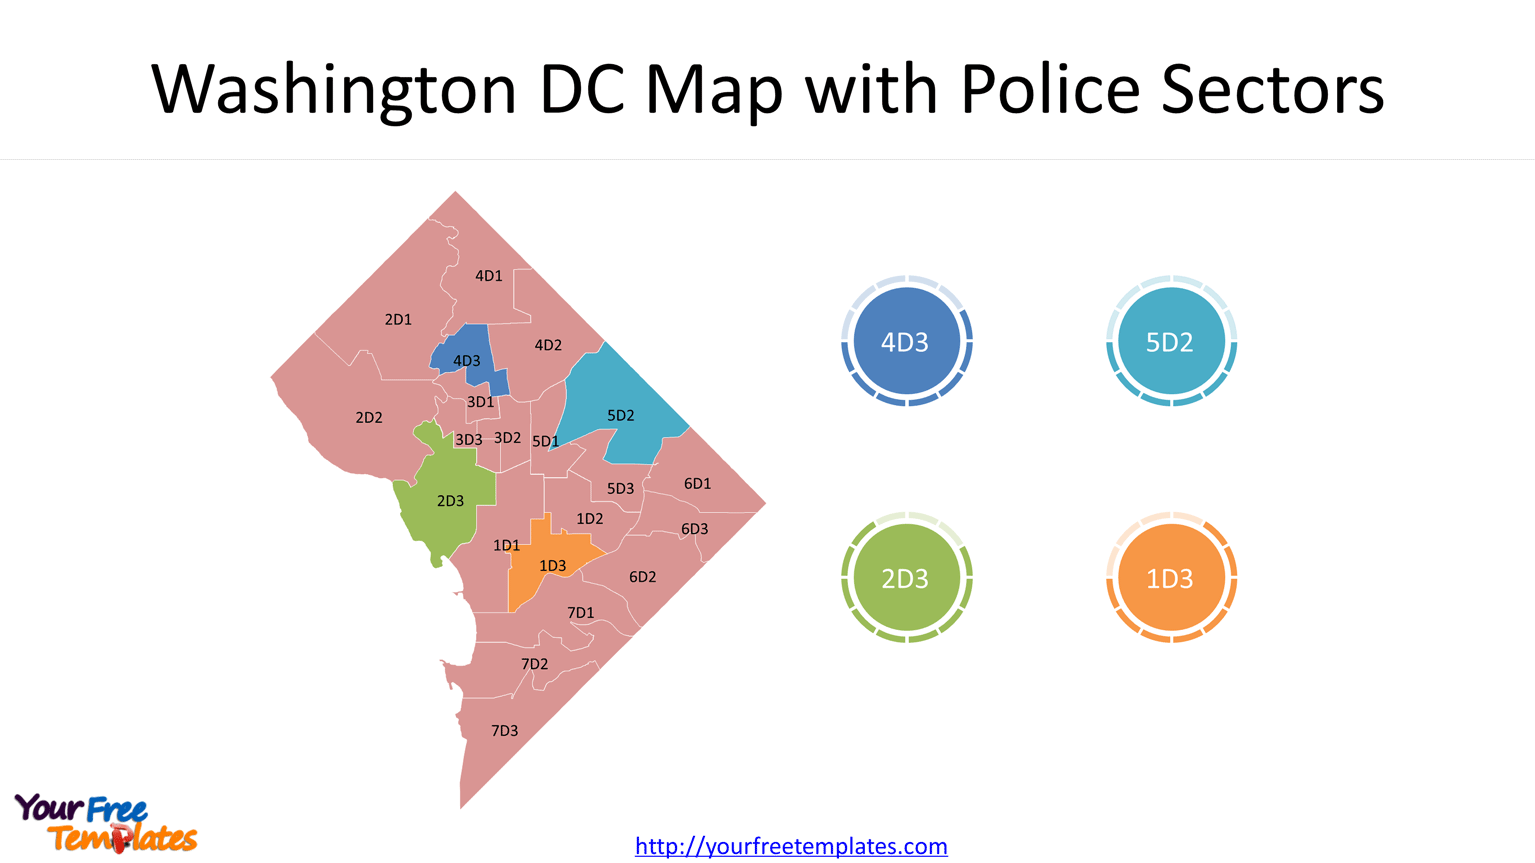  Washington DC Map with Police Sectors